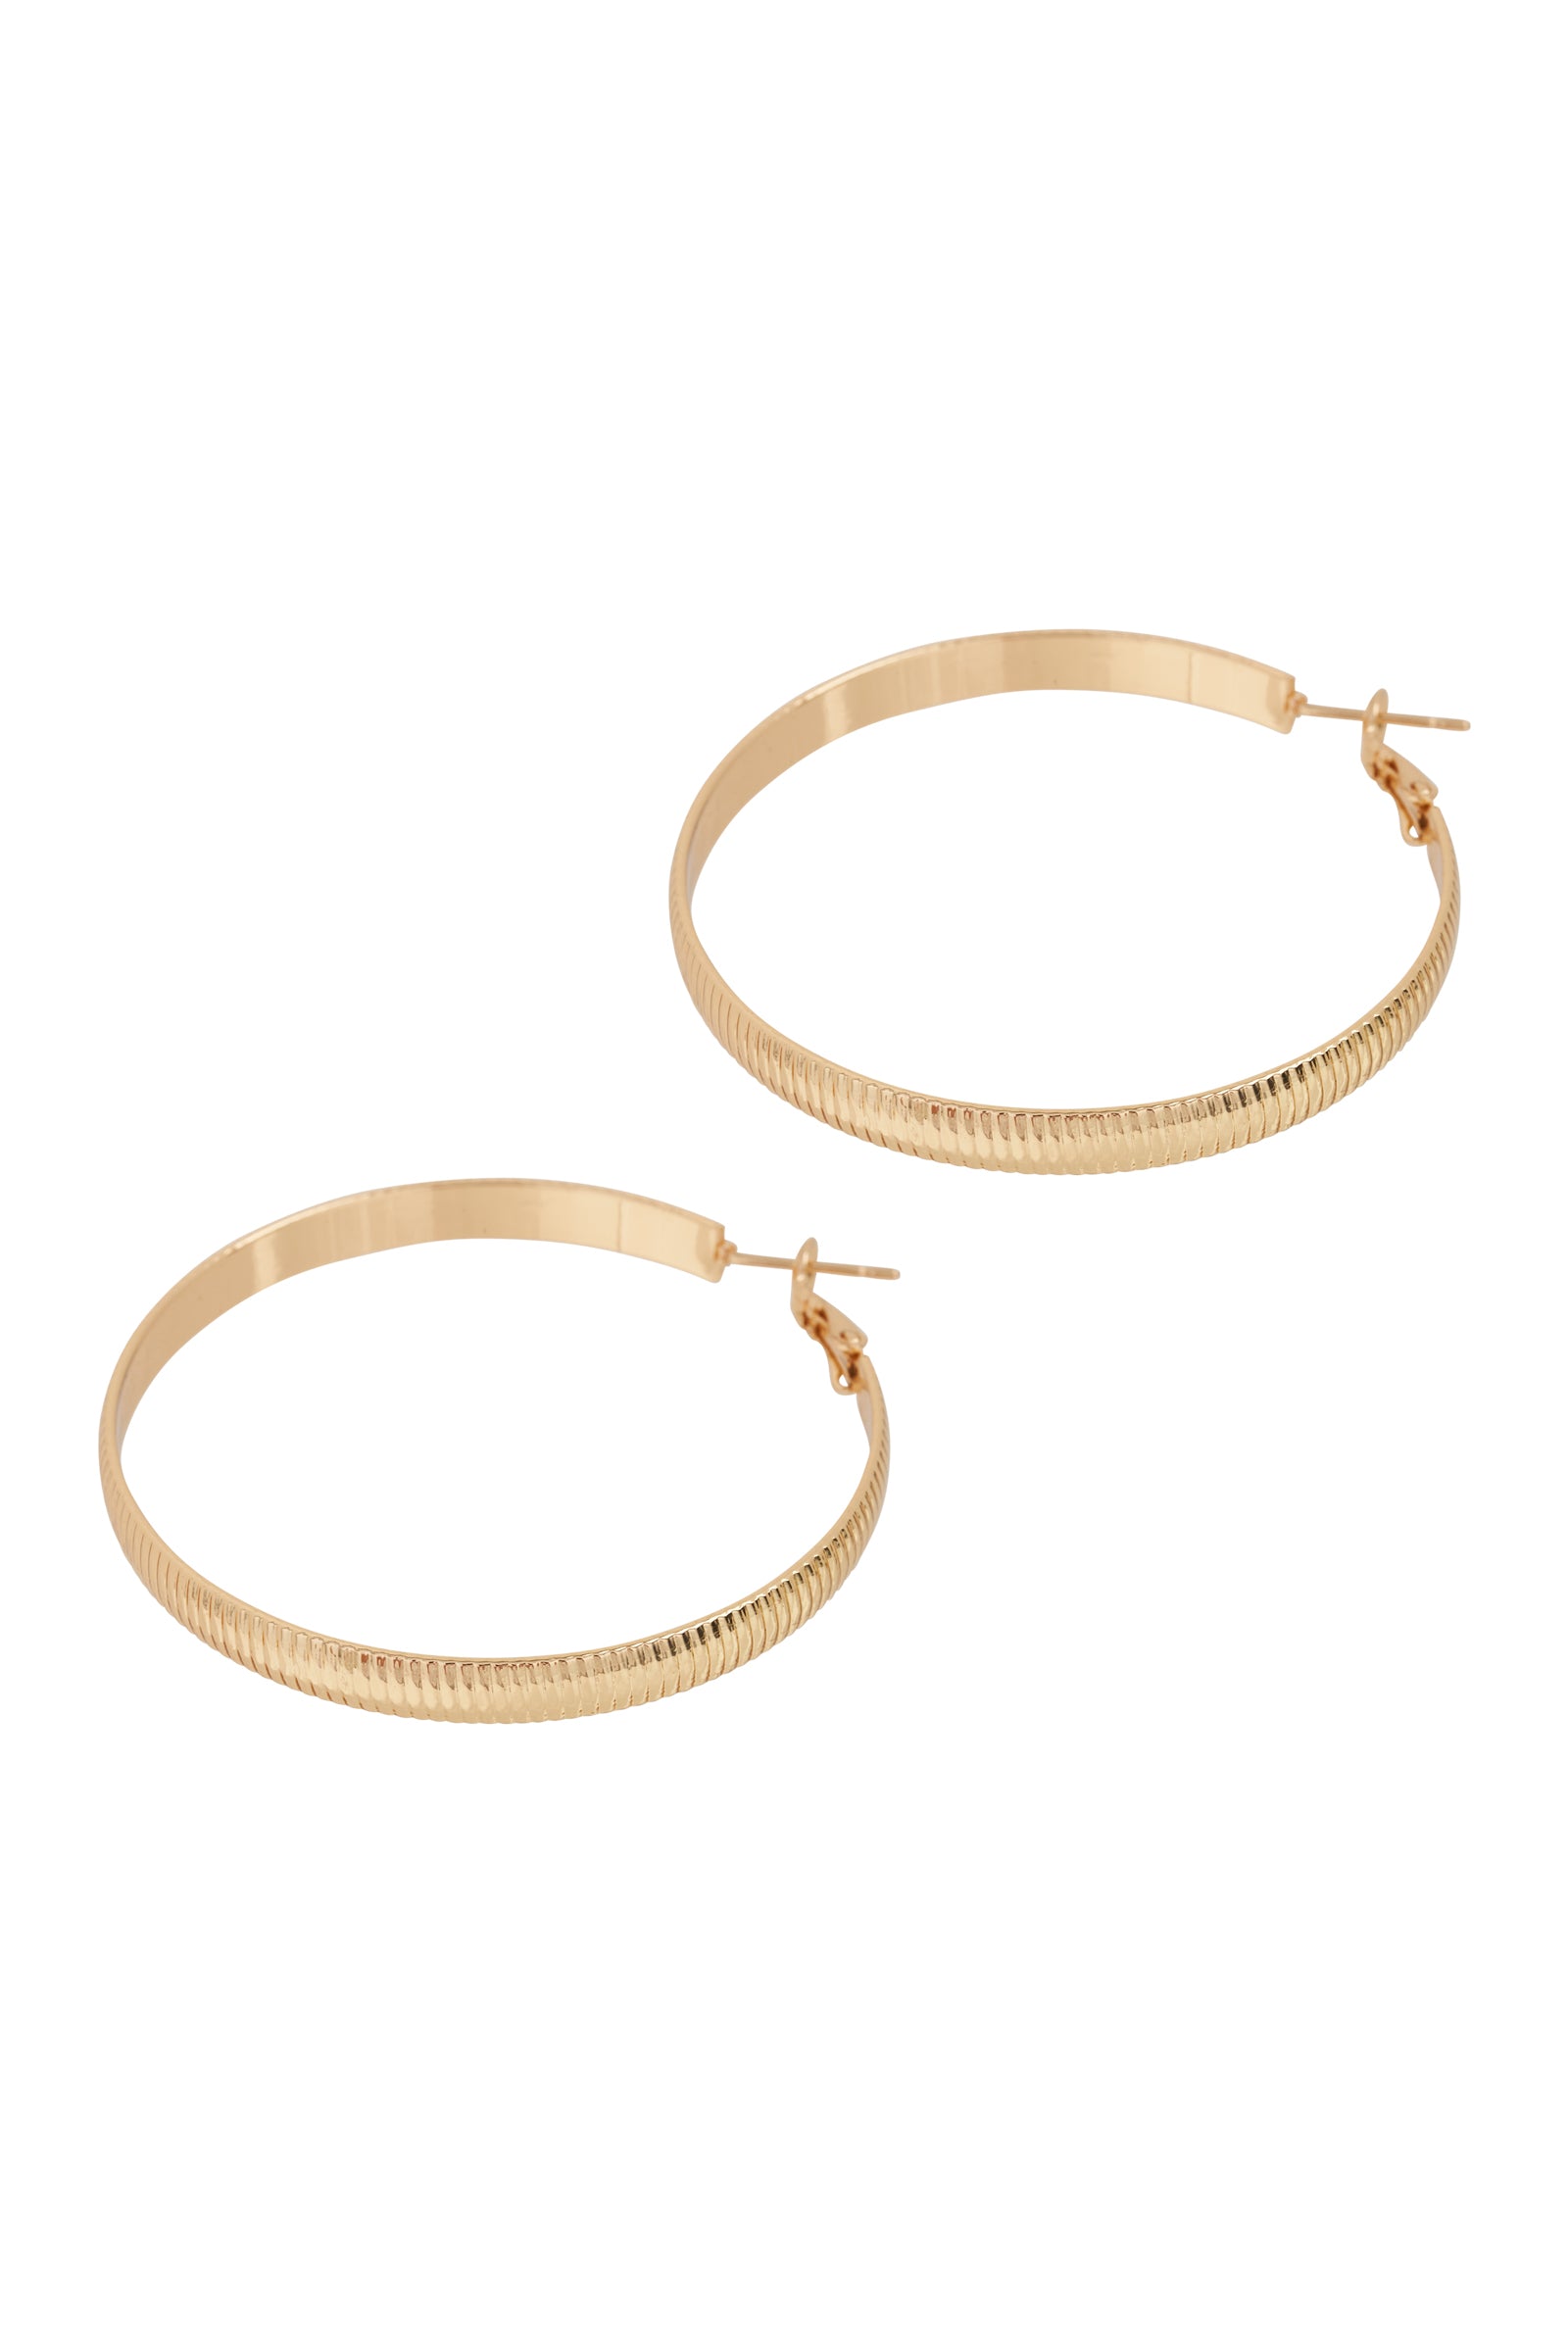 Norse Large Hoop - Gold - eb&ive Earring